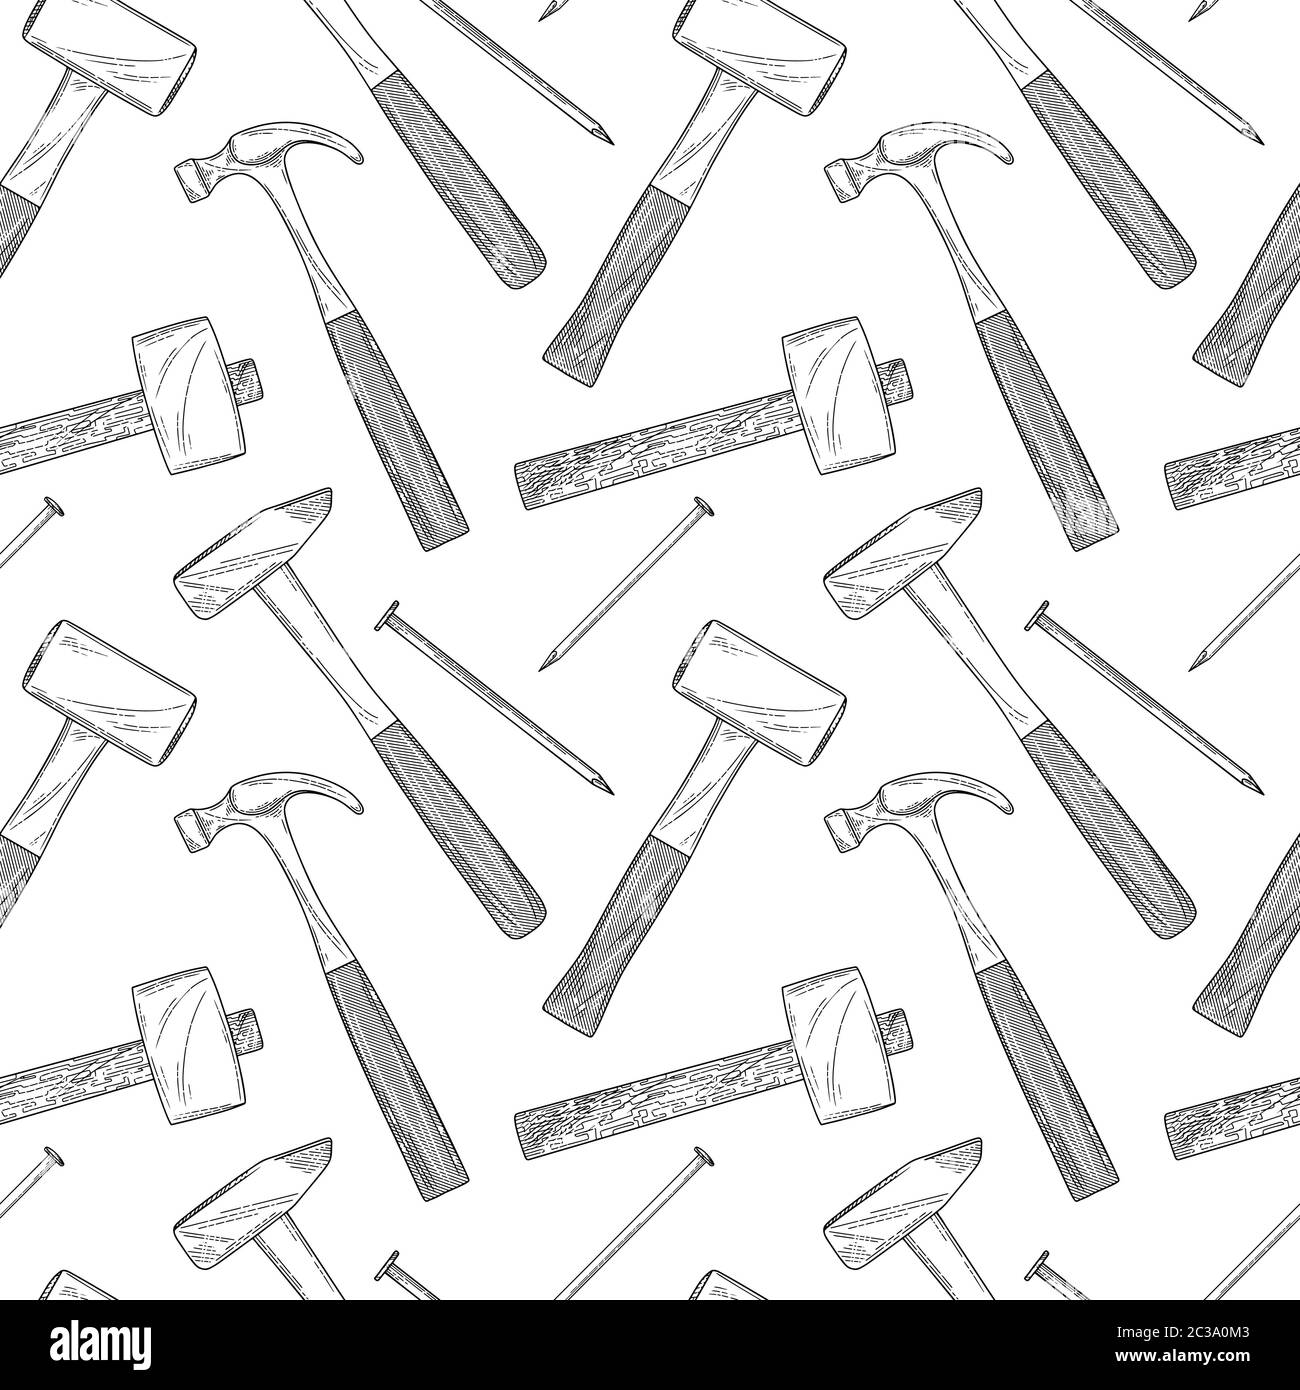 Seamless pattern with different hammers and nails on a white background. Vector illustration in sketch style. Stock Vector